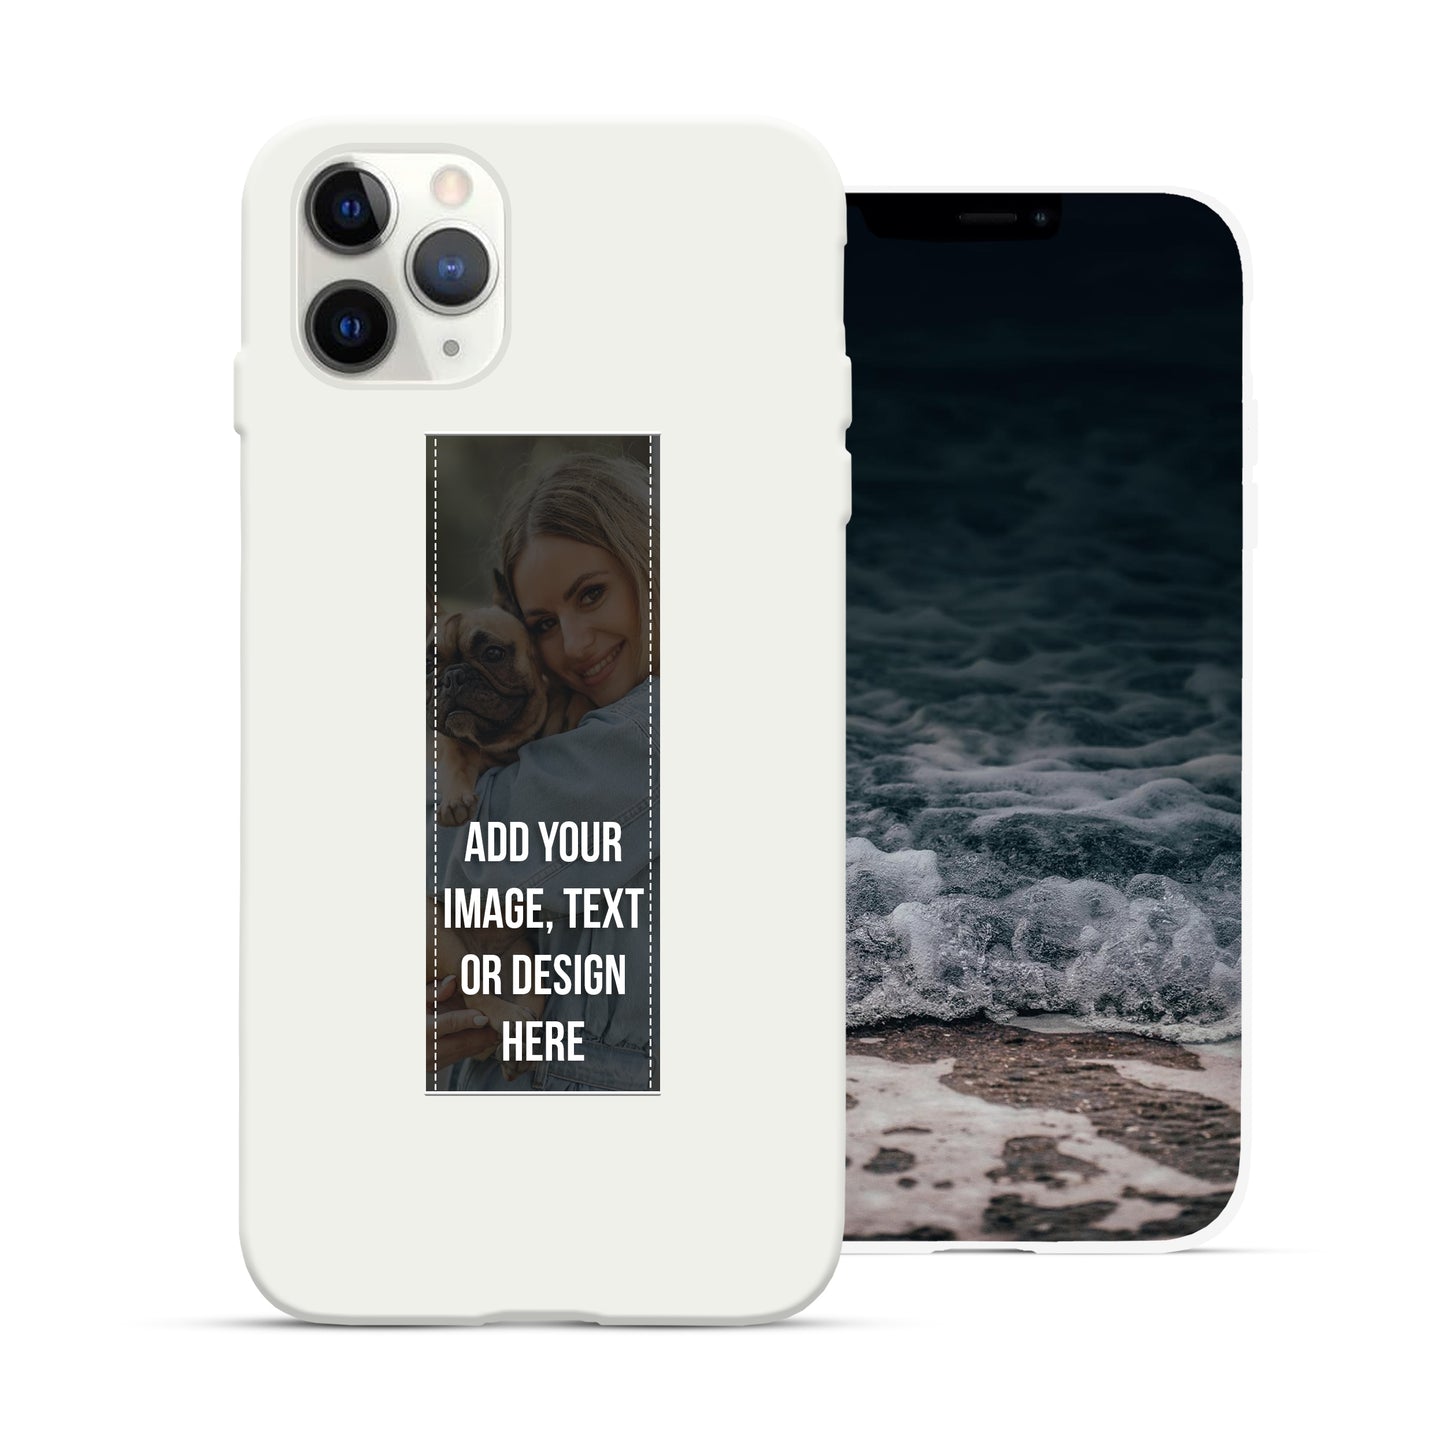 Finger Loop Phone Case For iPhone 12 Pro Max White With Custom Strap